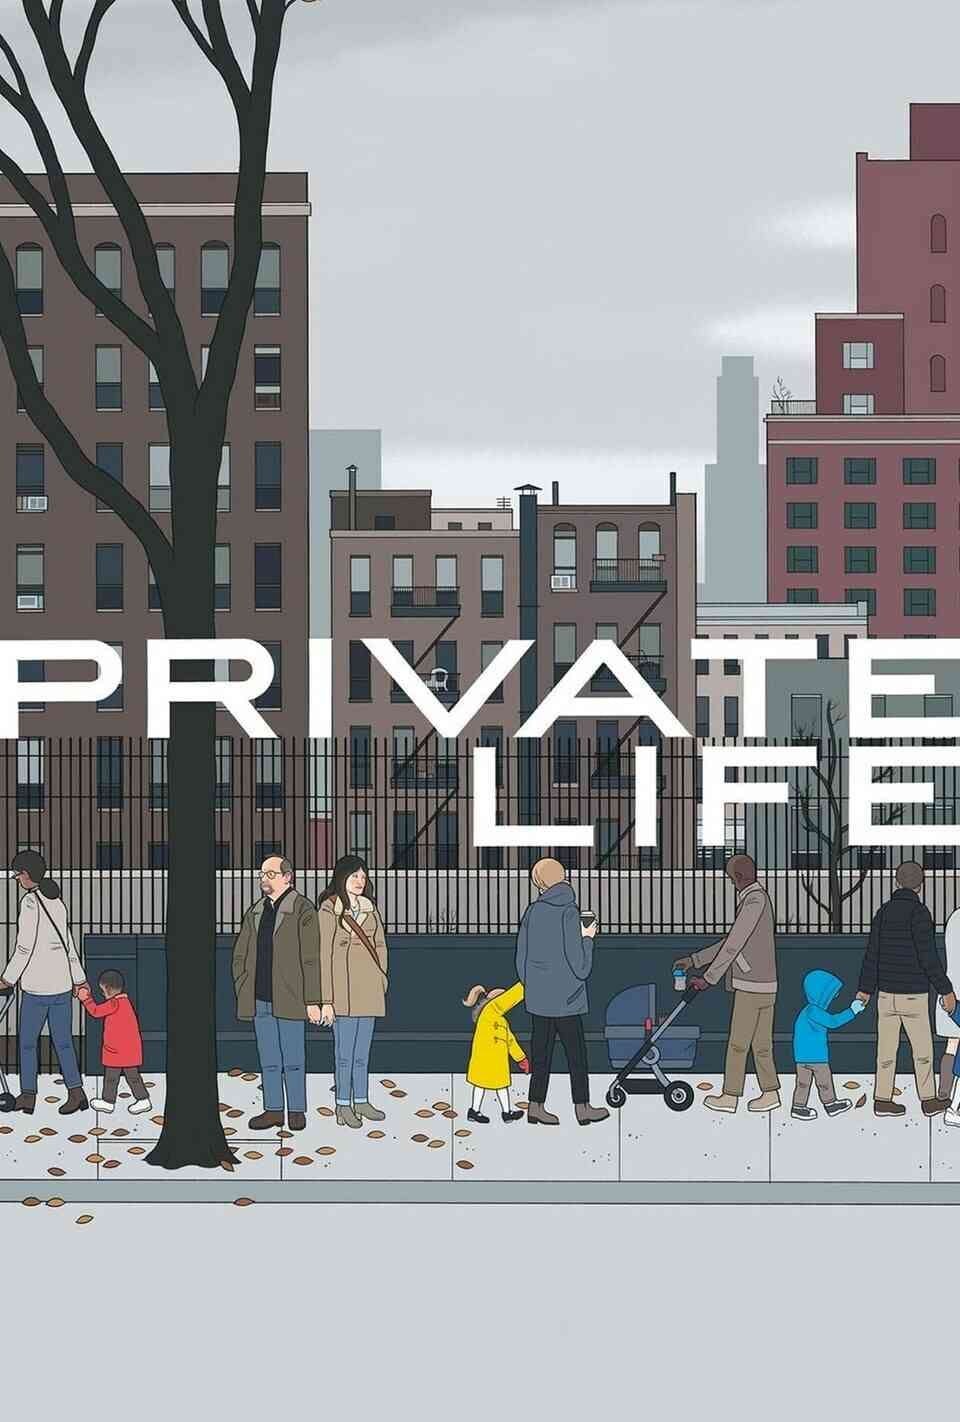 Read Private Life screenplay (poster)